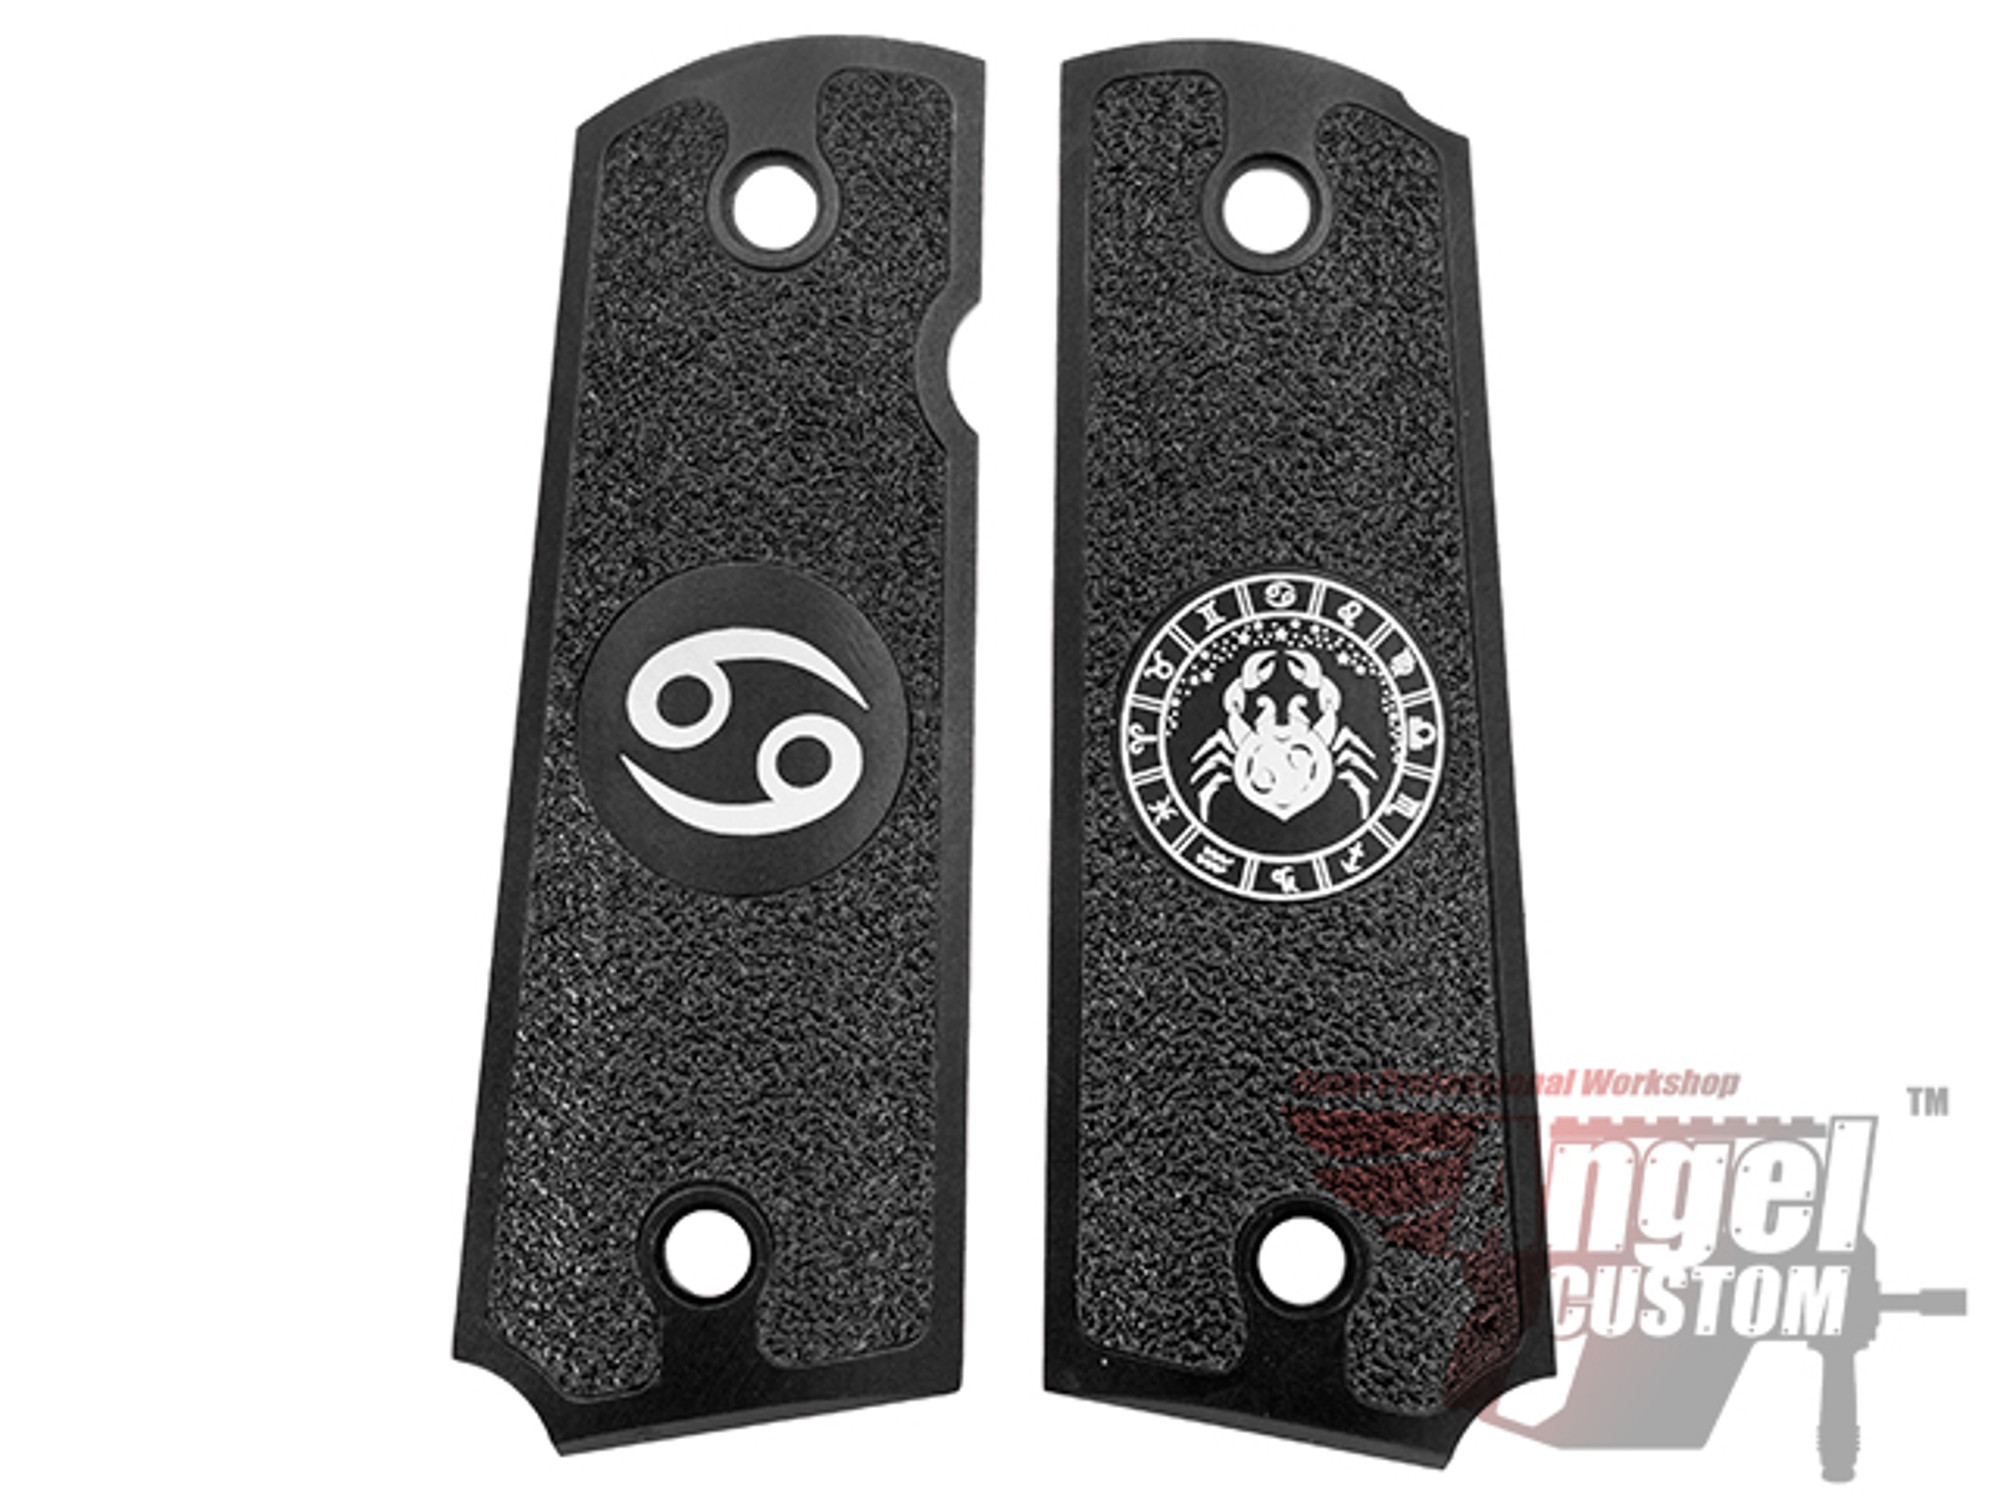 Angel Custom CNC Machined Tac-Glove "Zodiac" Grips for WE-Tech 1911 Series Airsoft Pistols - Cancer (Black)